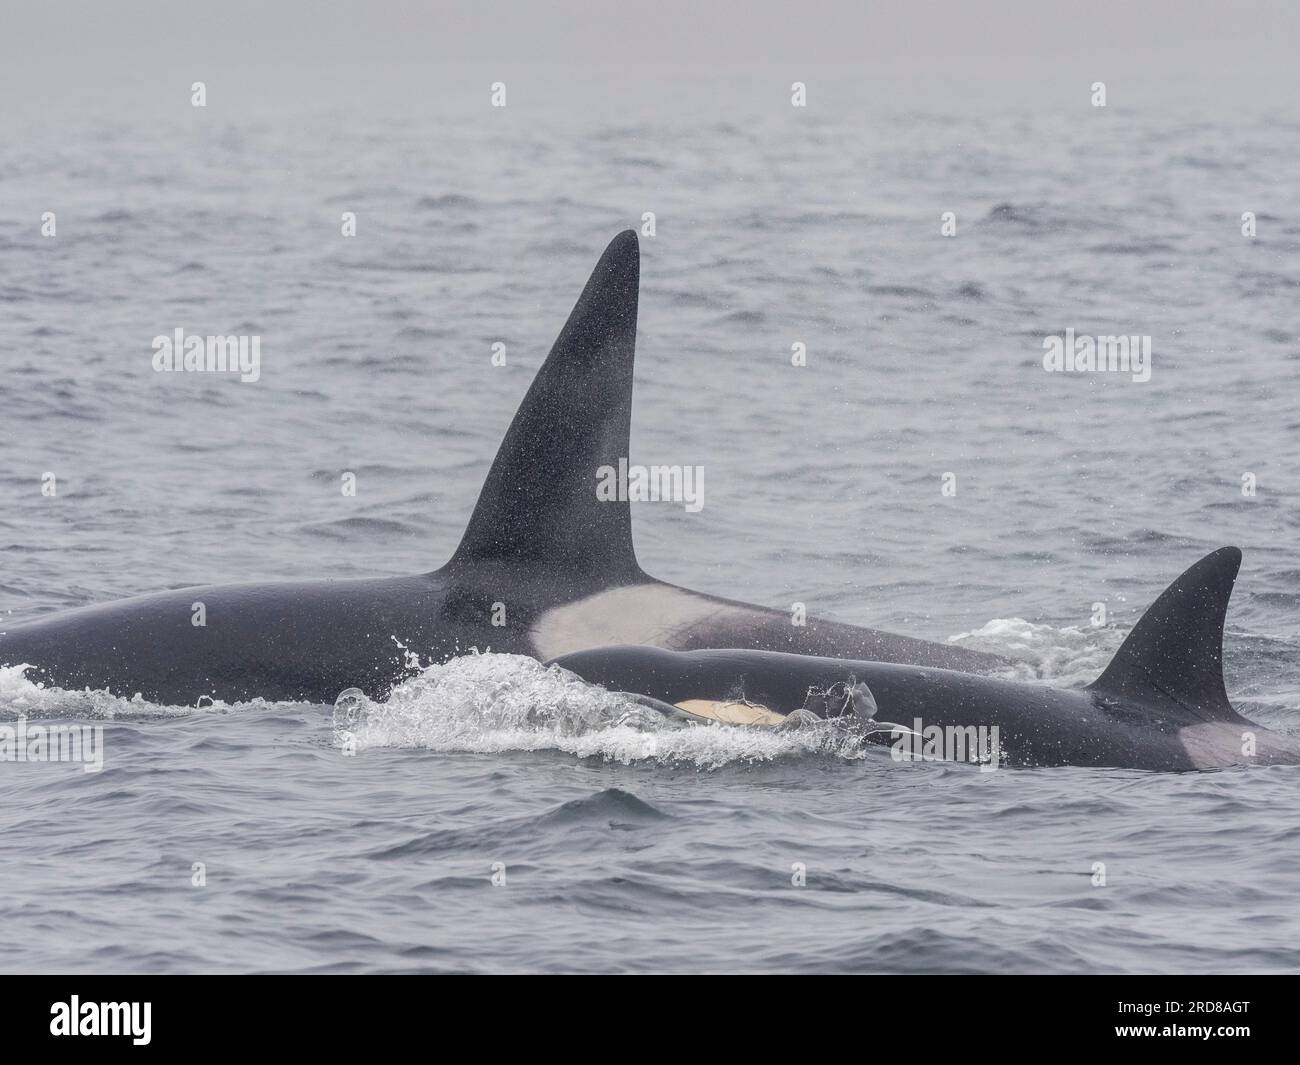 A pod of transient killer whales (Orcinus orca), catching and killing an elephant seal in Monterey Bay Marine Sanctuary, California, USA Stock Photo